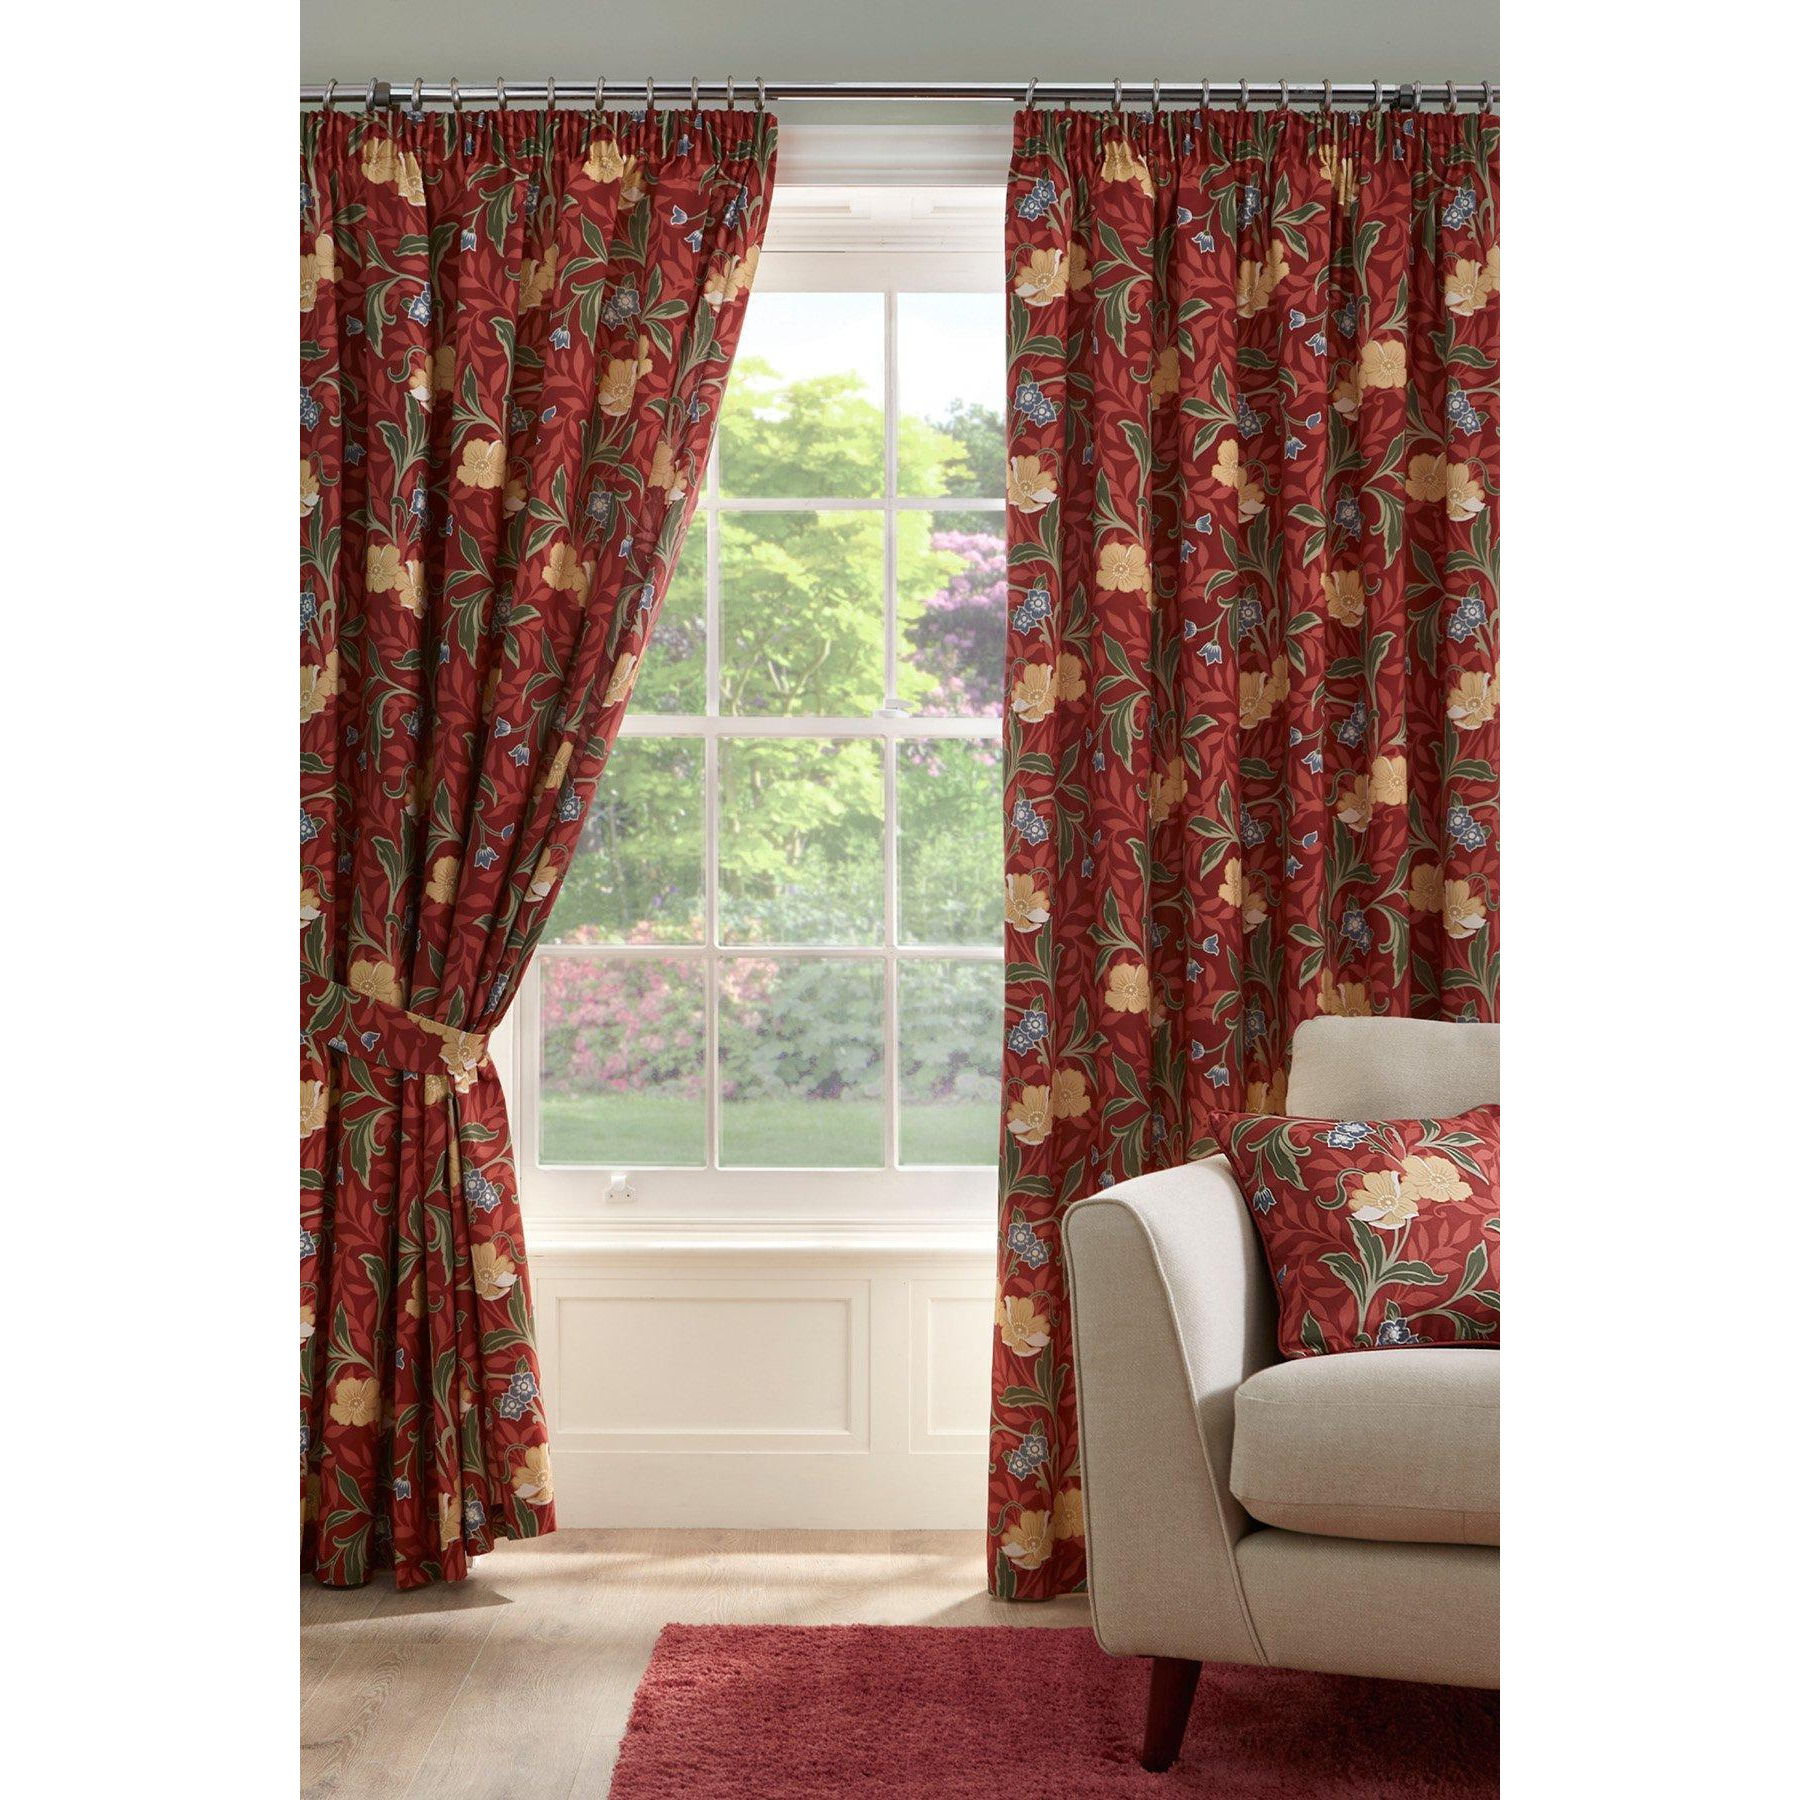 'Sandringham' 100% Cotton Pair of Pencil Pleat Curtains With Tie-Backs - image 1